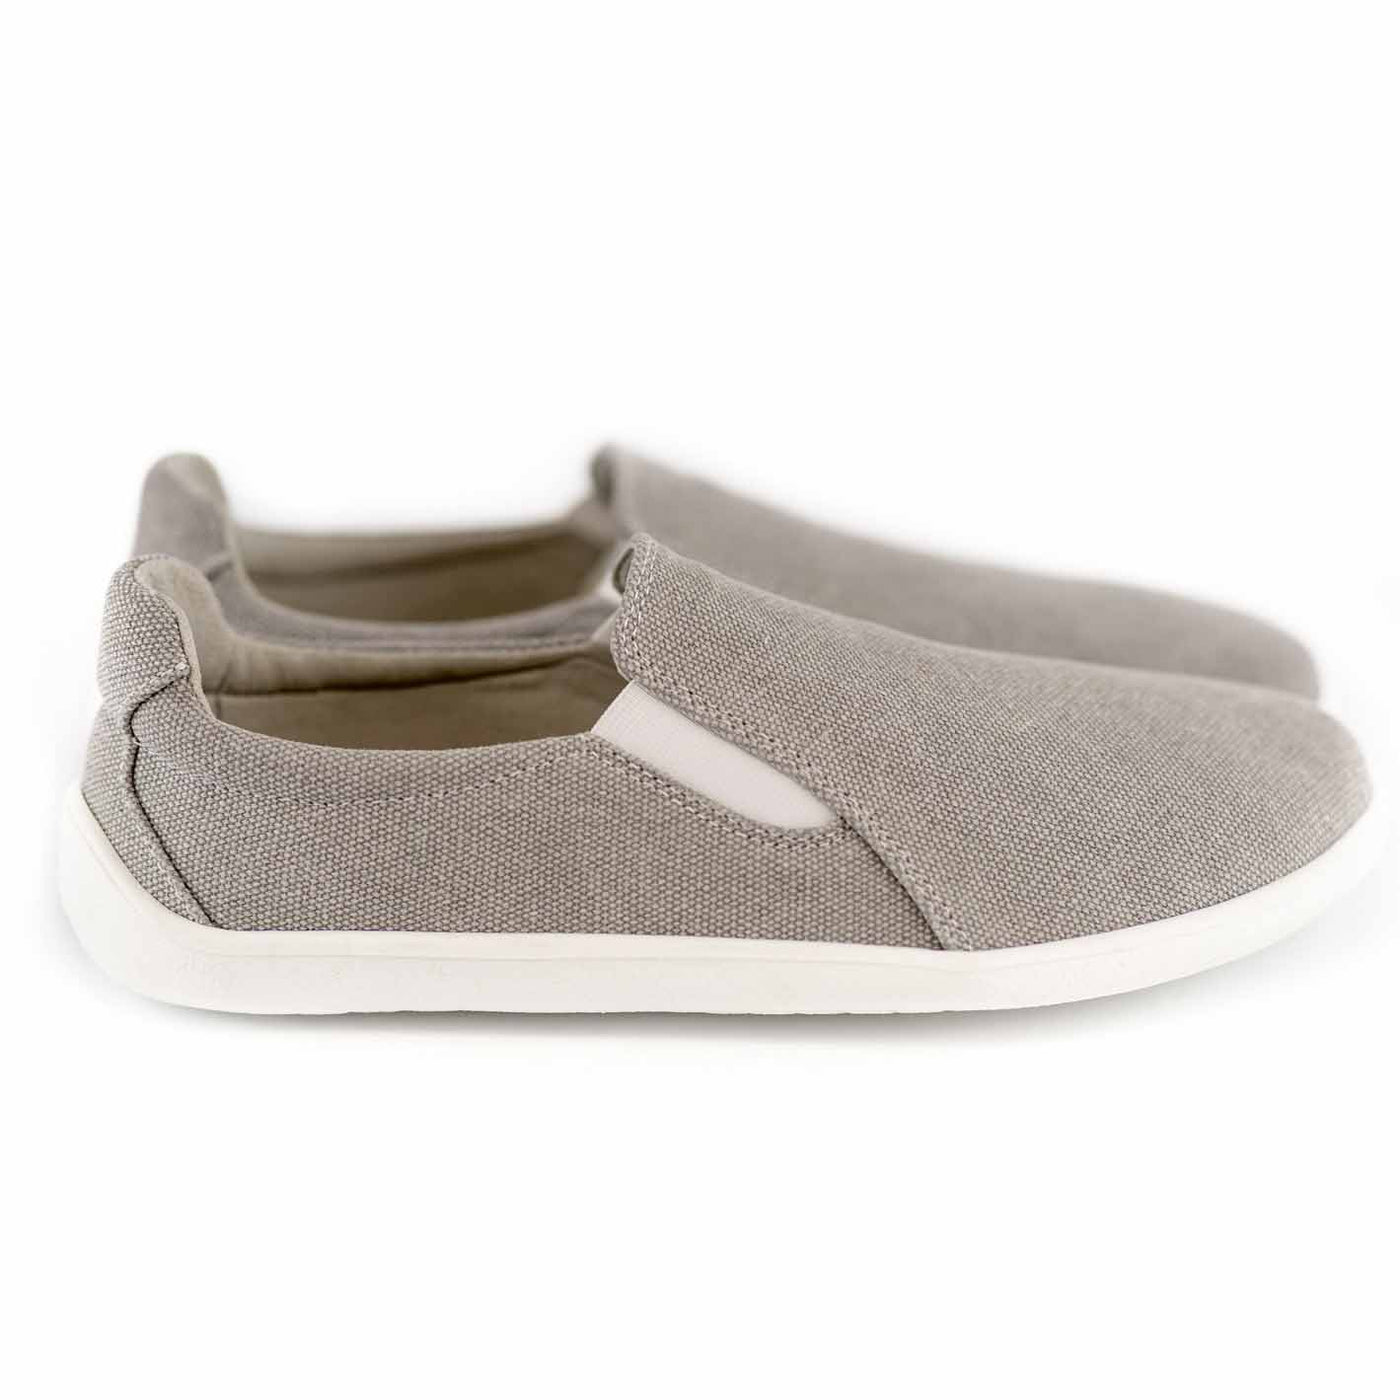 A photo of Belenka Eazy slip-on sneakers made from canvas and rubber soles. The sneakers are a sand color with white elastic on the sides and soles. Both shoes are shown beside each other facing towards the left against a white background. #color_sand